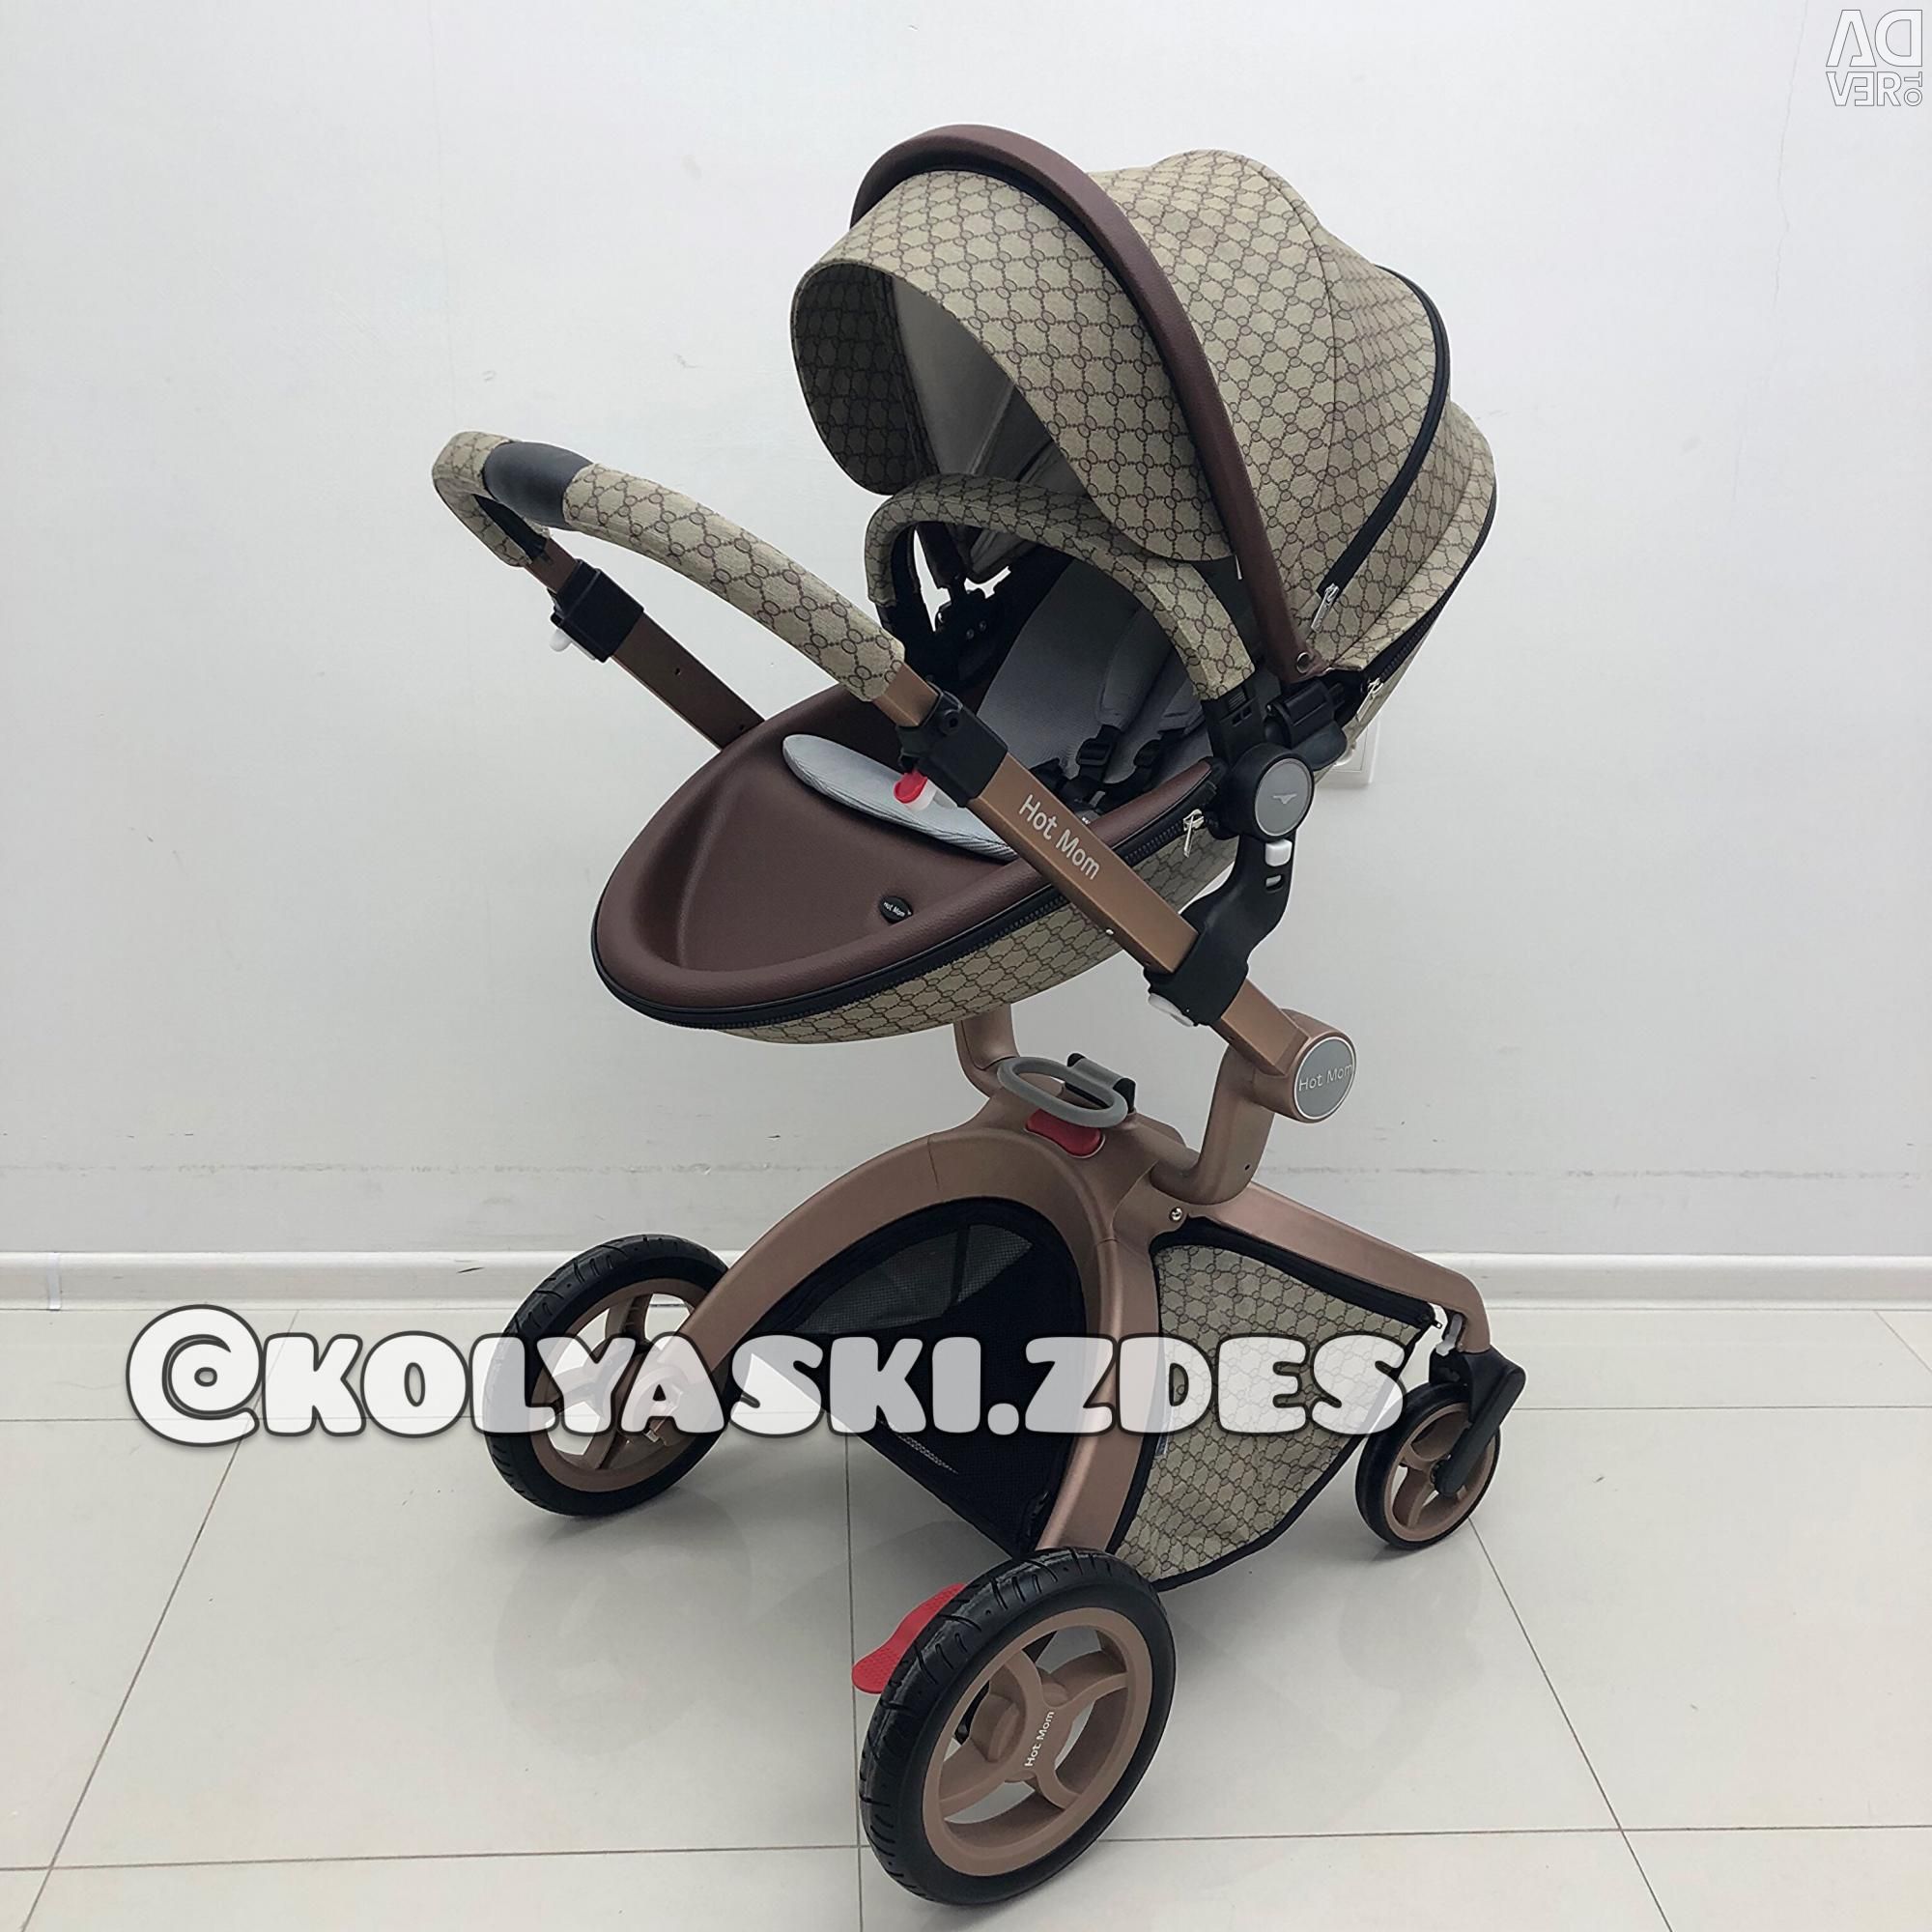 Mathematical Assert Composer Stroller Hot Mom Guchi available in Omsk, Omsk - Sale advertisements, Price  28 990 ₽, Published: 19.12.2018